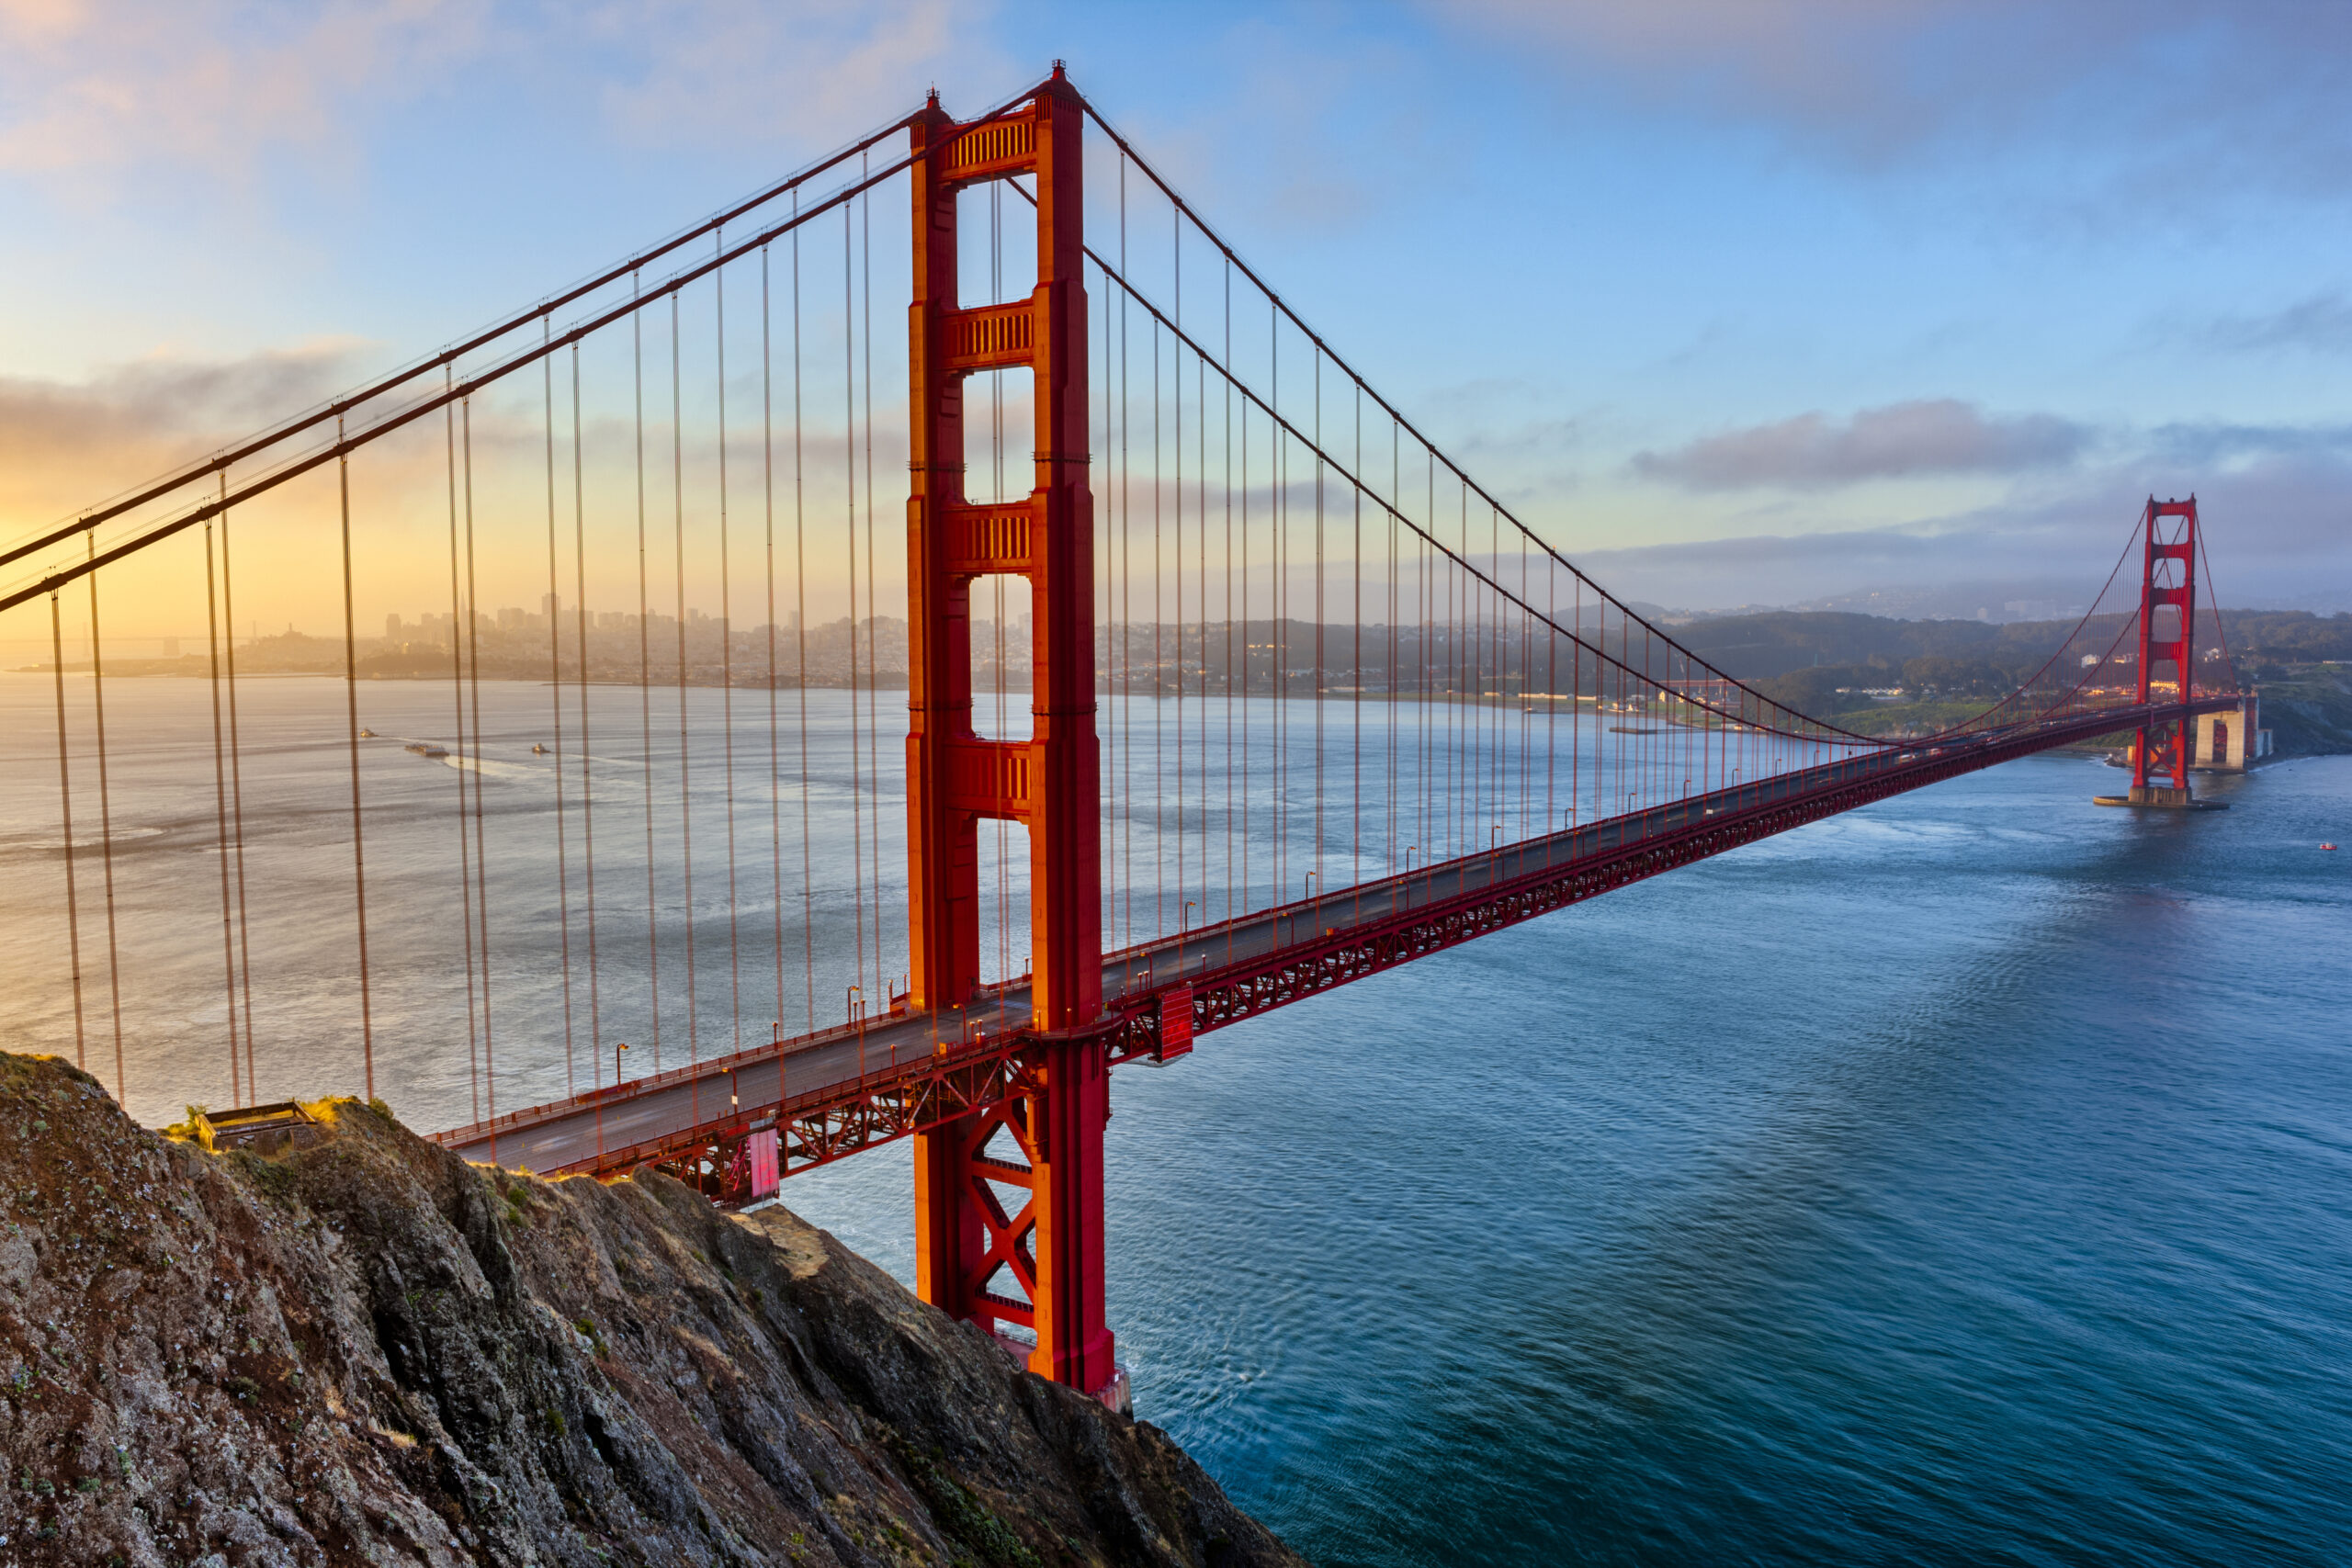 golden gate bridge in san francisco, california is iconic site to see when visiting united states